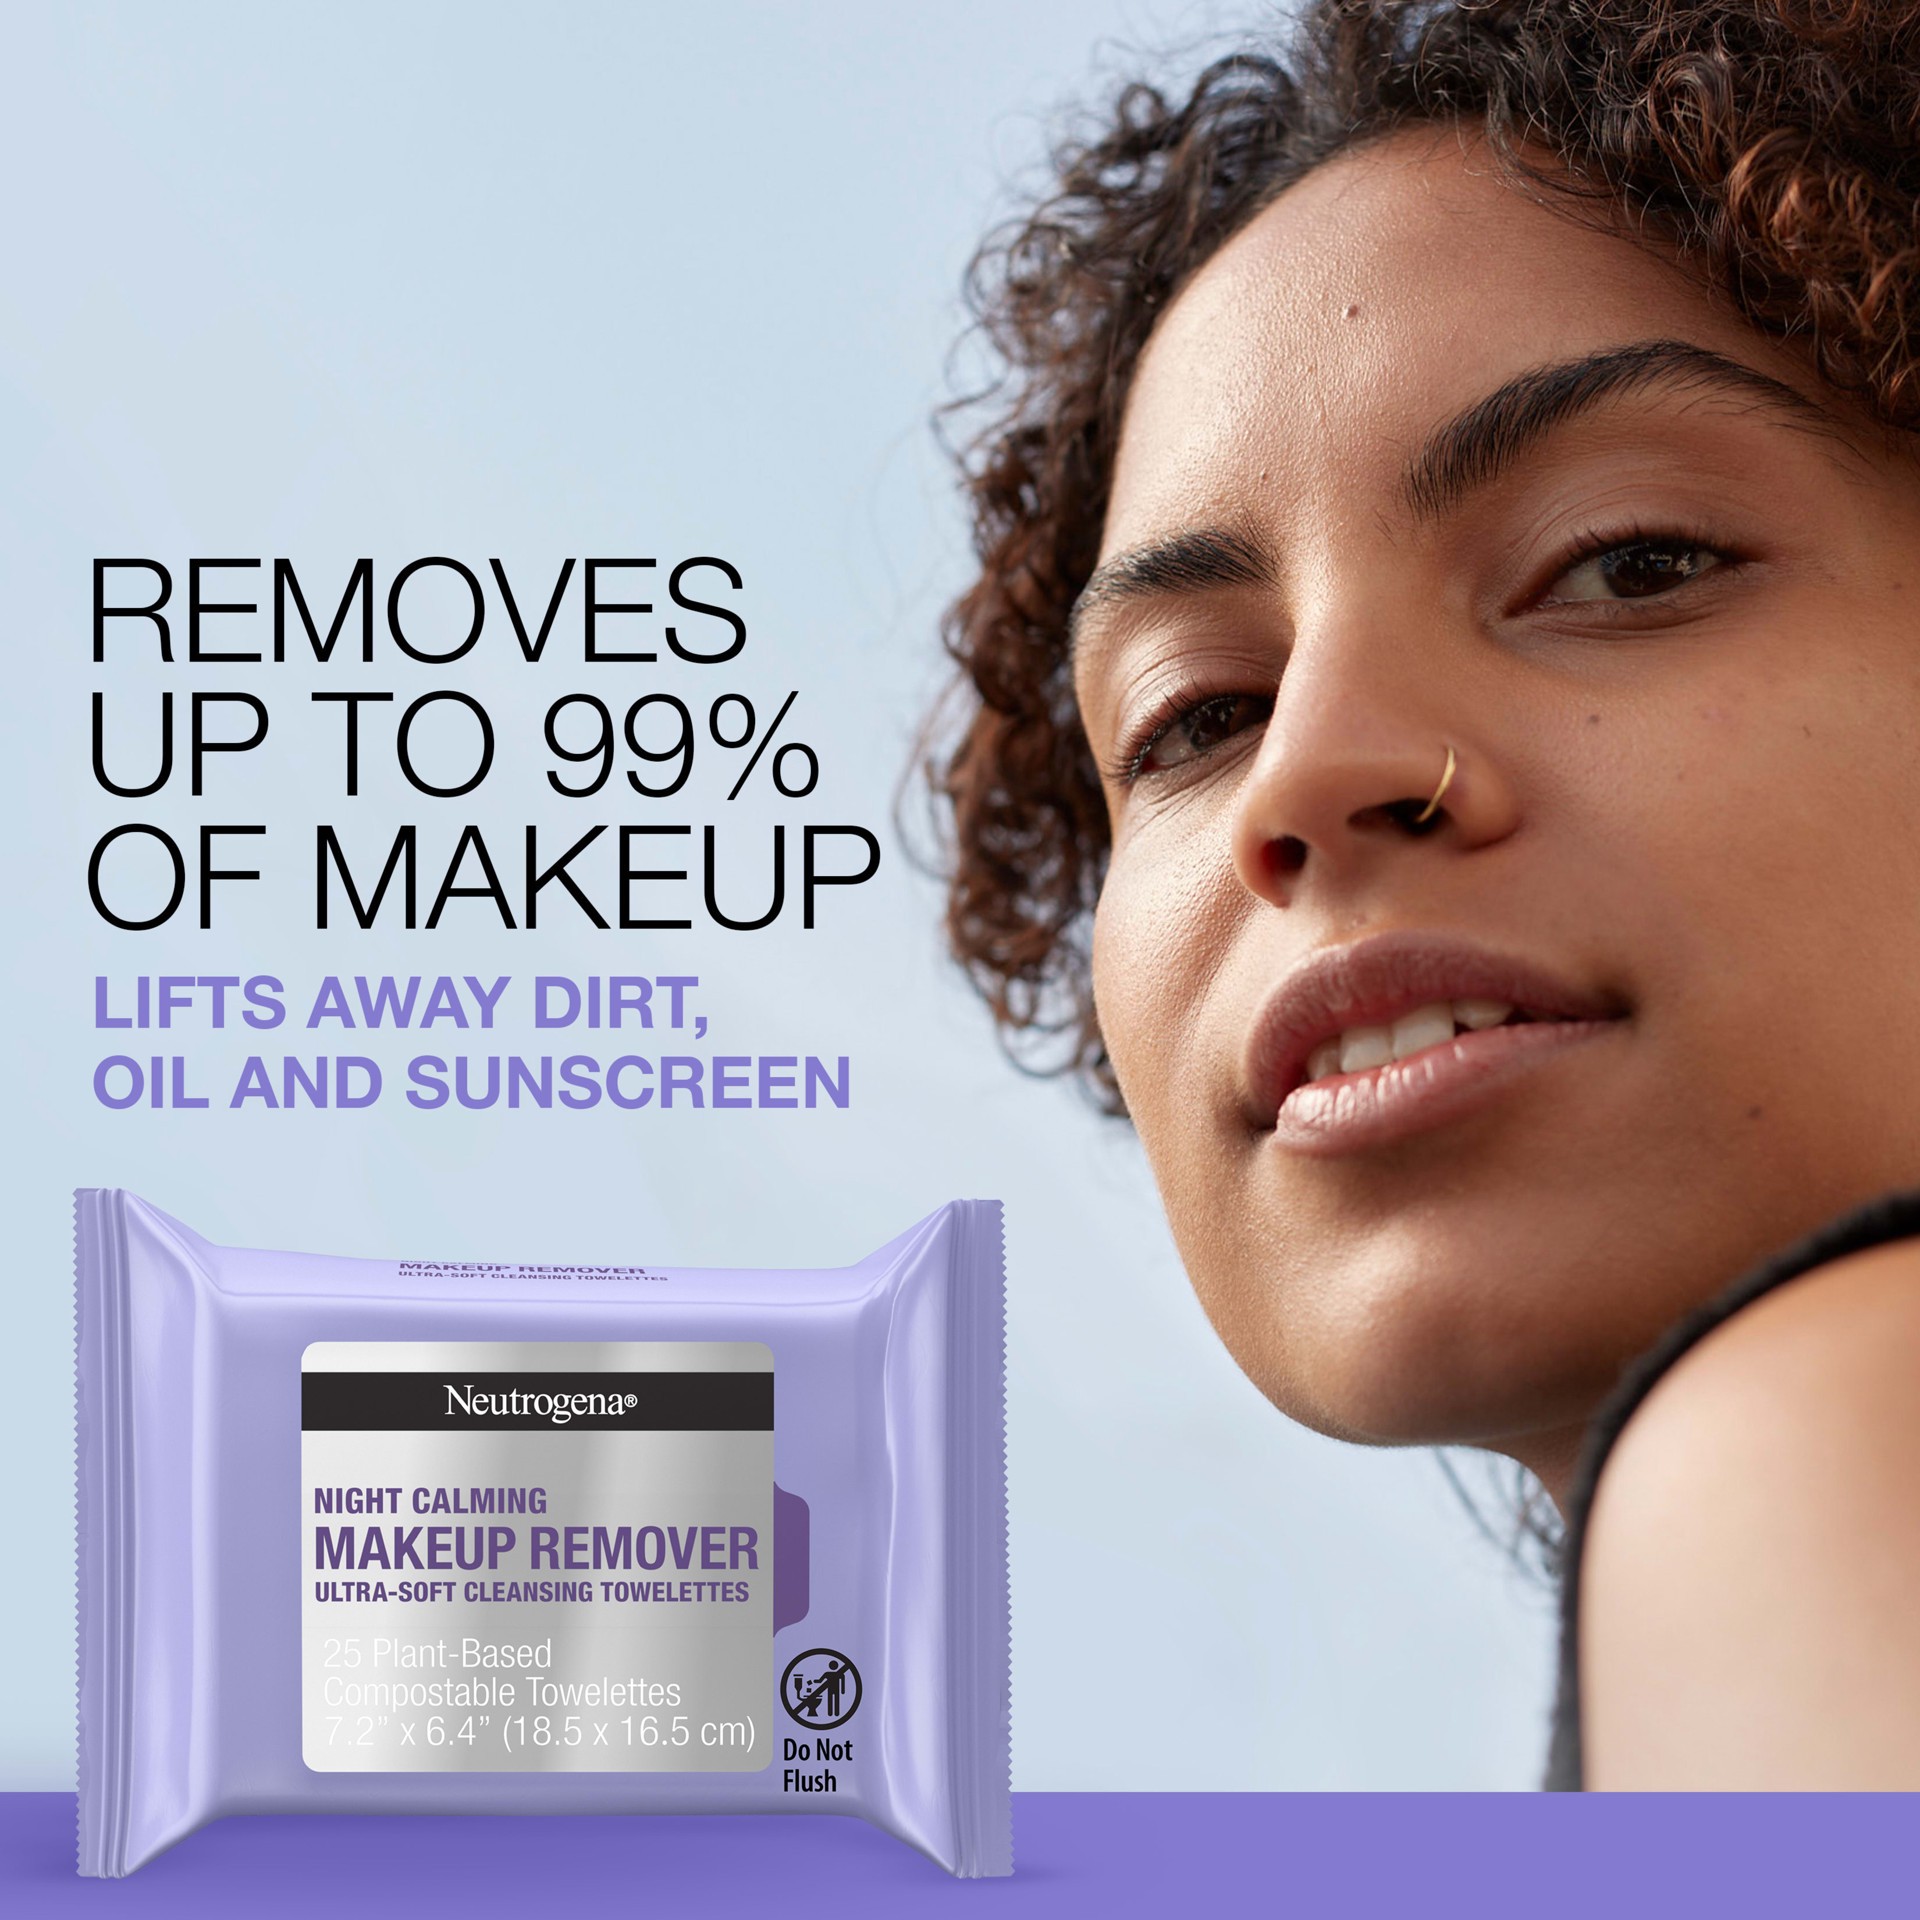 slide 3 of 9, Neutrogena Facial Cleansing Makeup Remover Night Calming Cleansing Wipes - 25ct, 25 ct